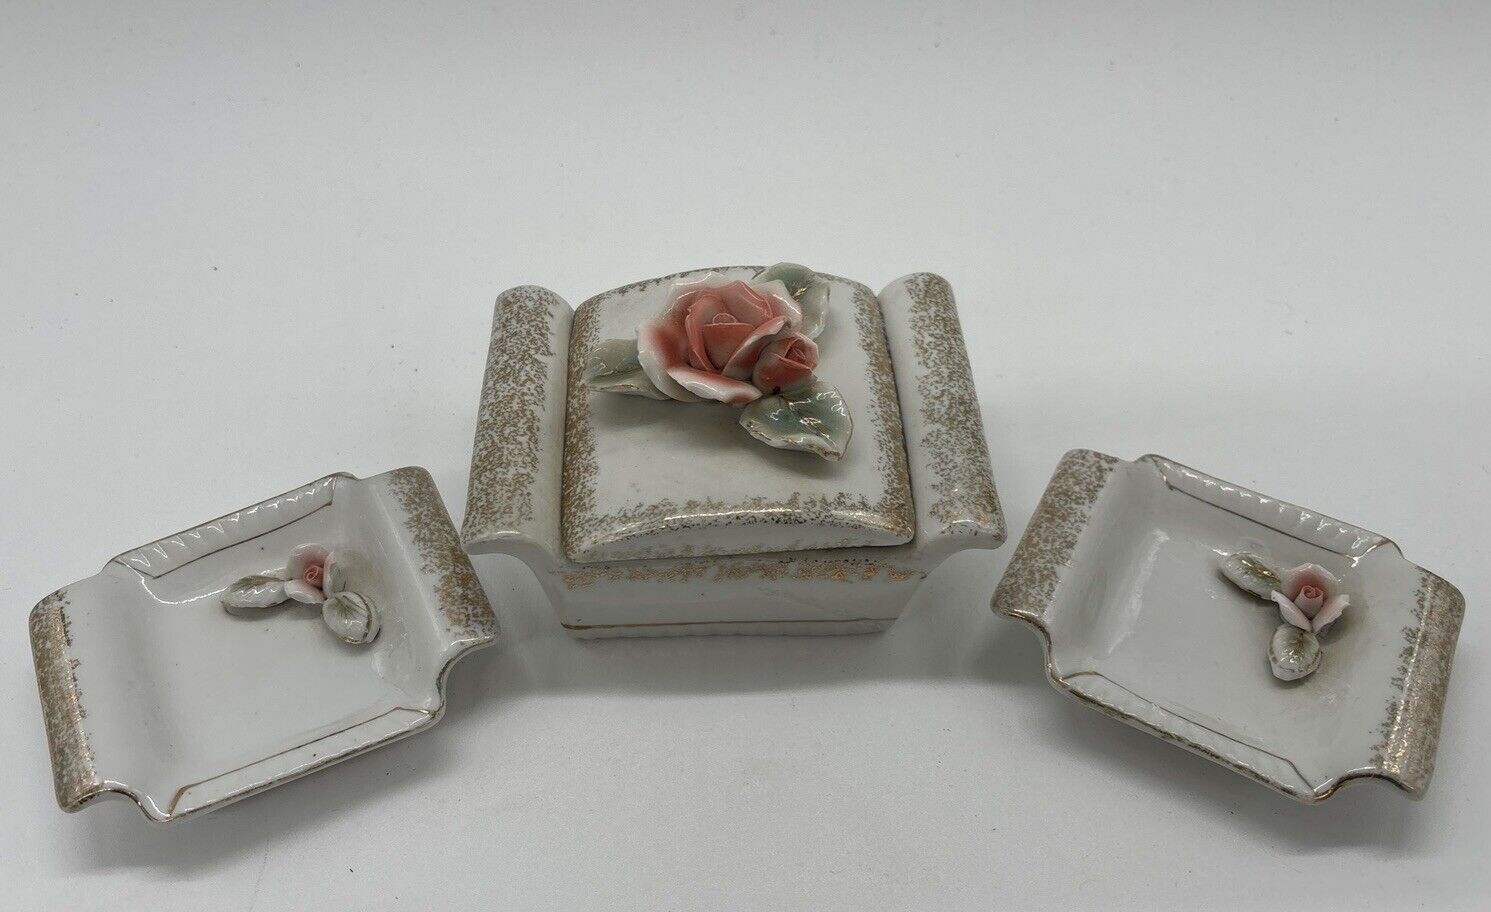 Vintage Vanity Box Trinket Dishes White Pink with Roses Made in Japan No Marking